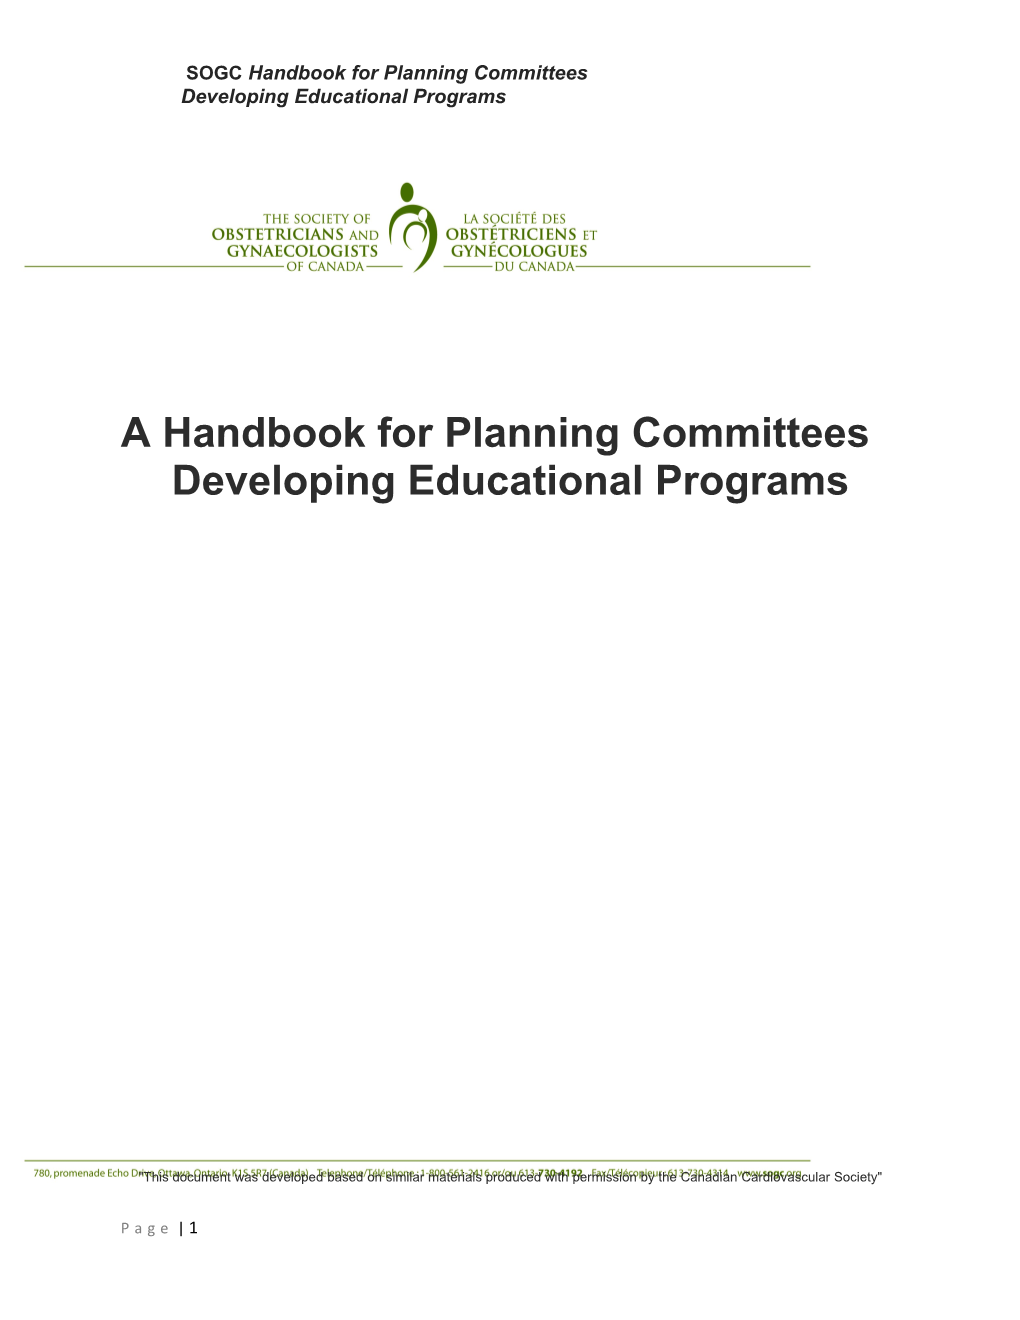 Handbook for Planning Committees Developping Educational Programs